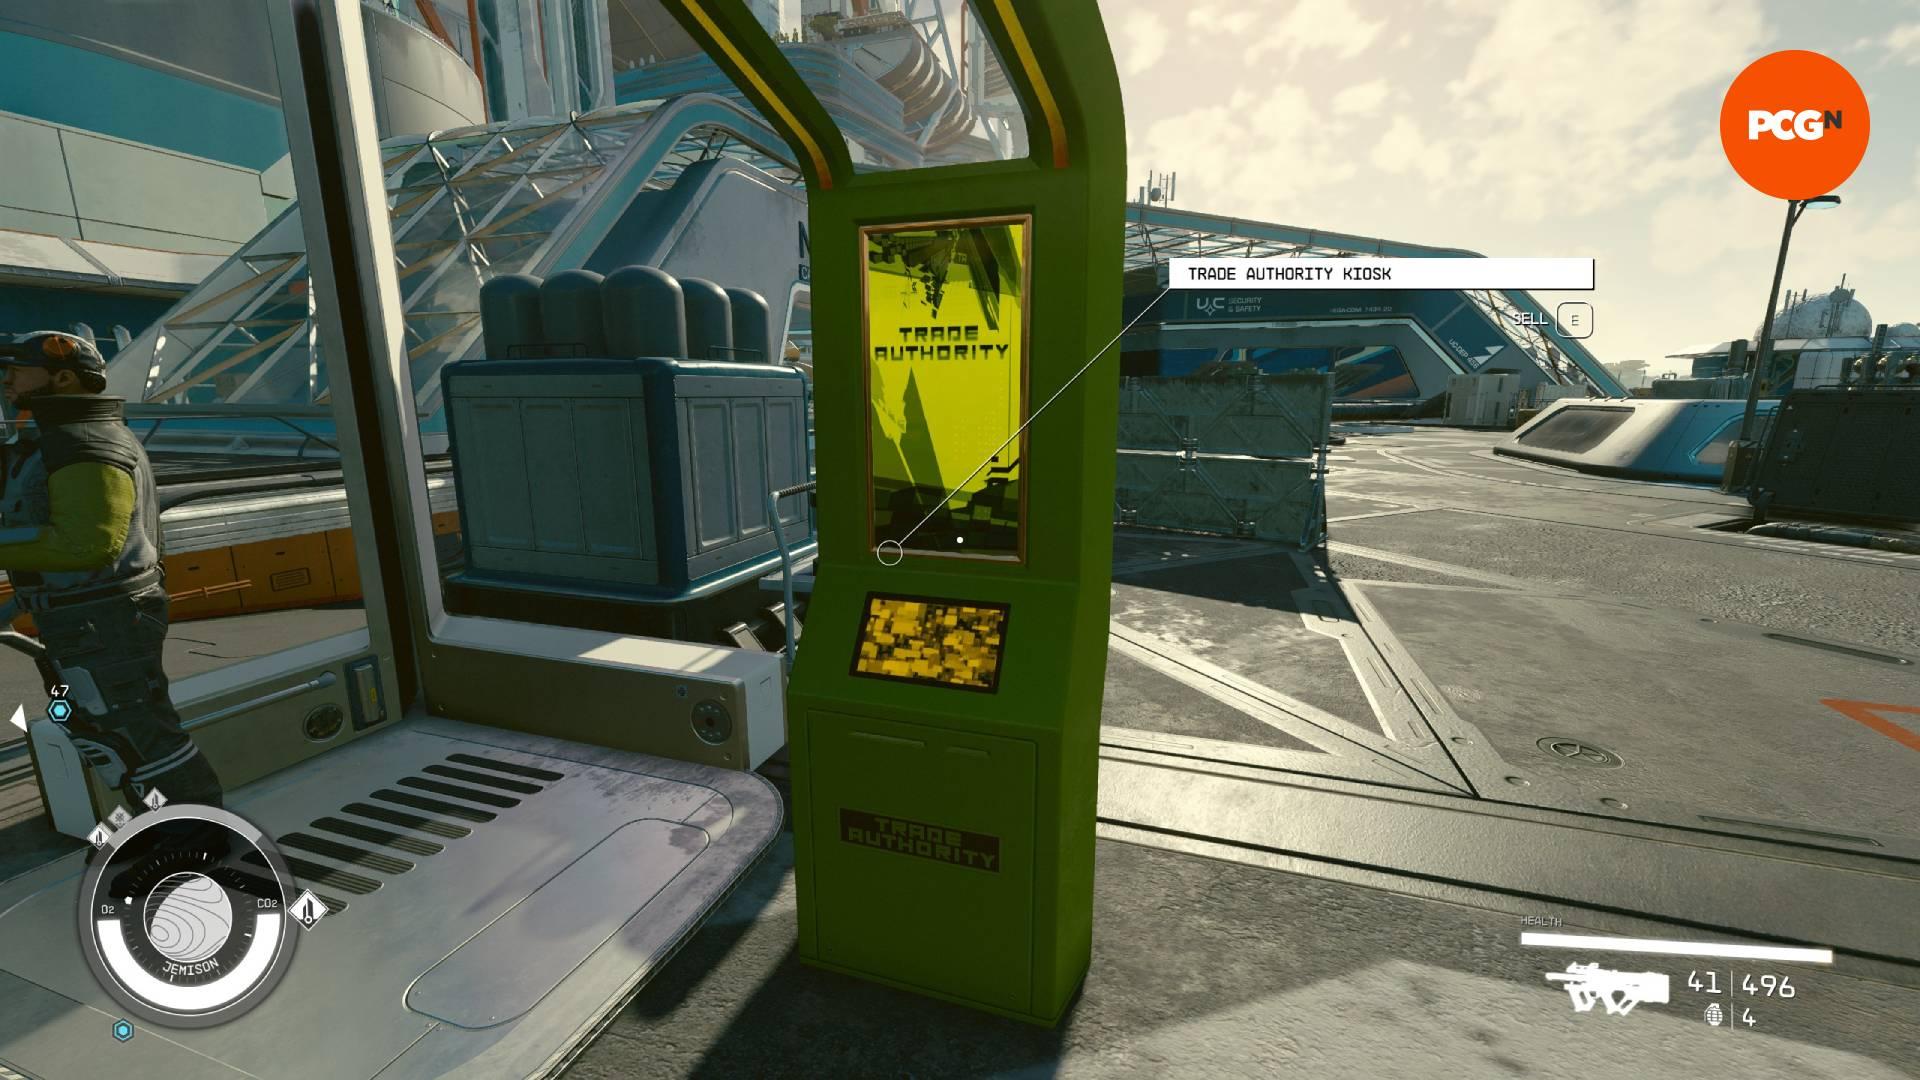 Where to sell items in Starfield: The Trade Authority Kiosk at New Atlantis.